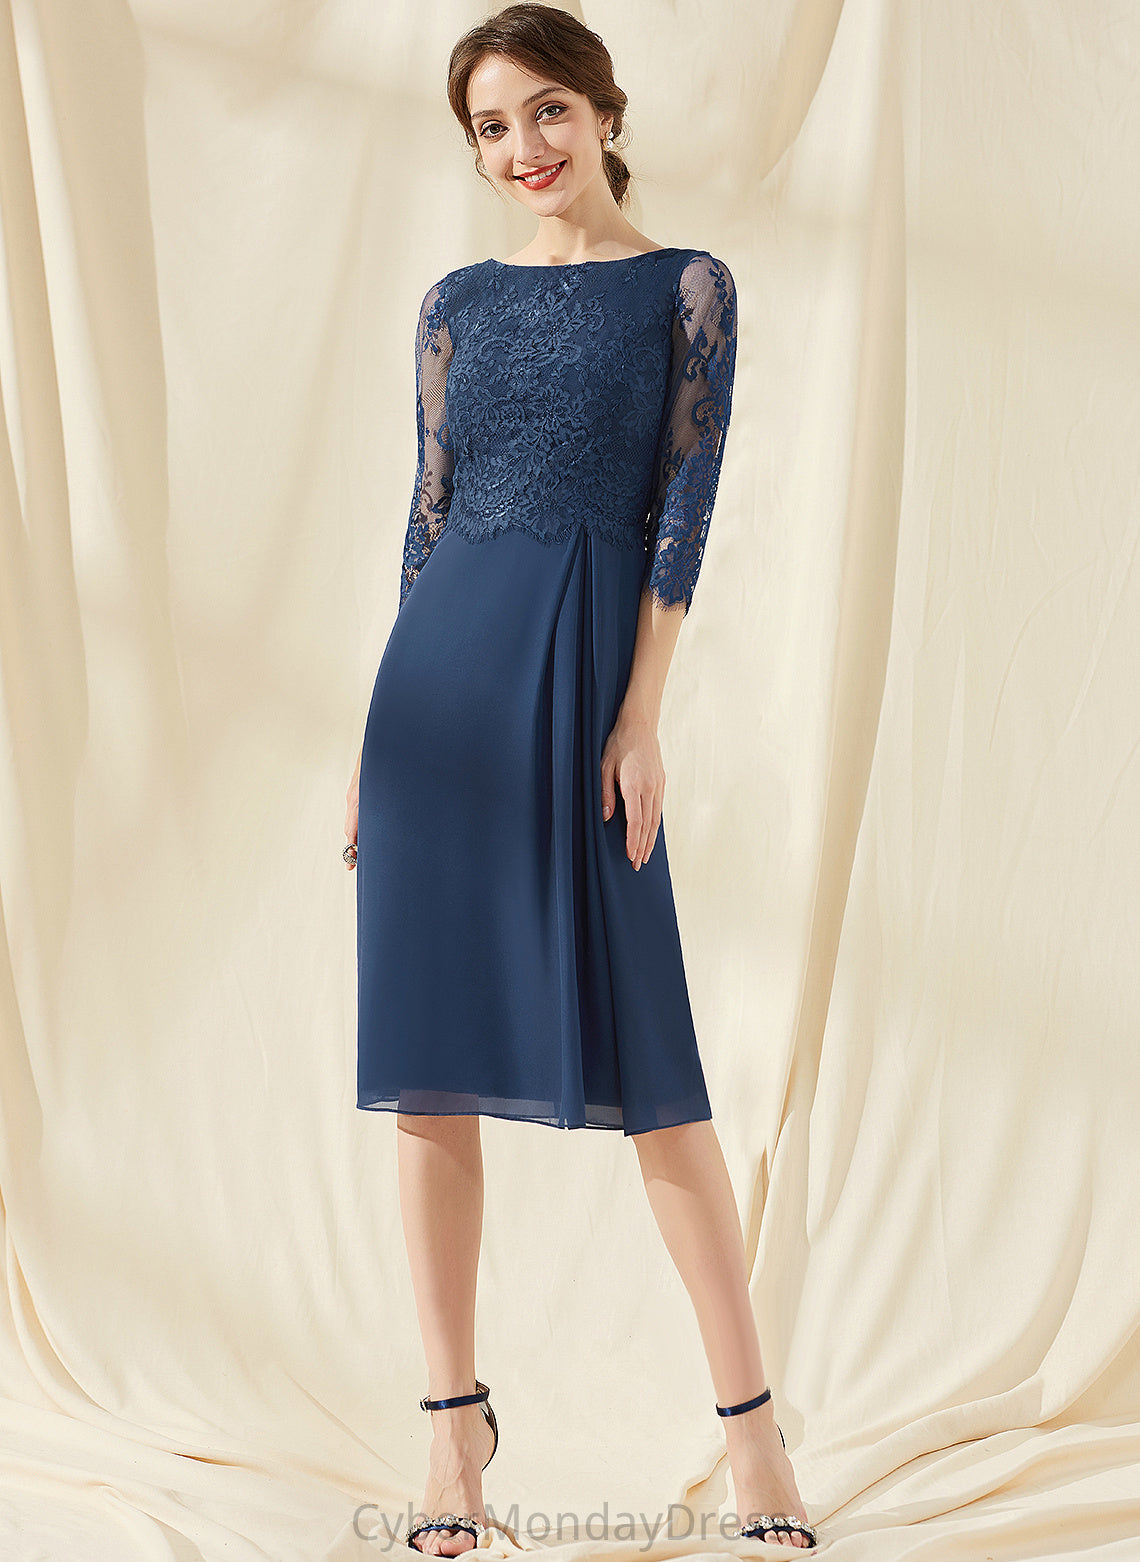 Sheath/Column Maureen Lace Scoop With Neck Chiffon Knee-Length Dress Ruffle Cocktail Dresses Cocktail